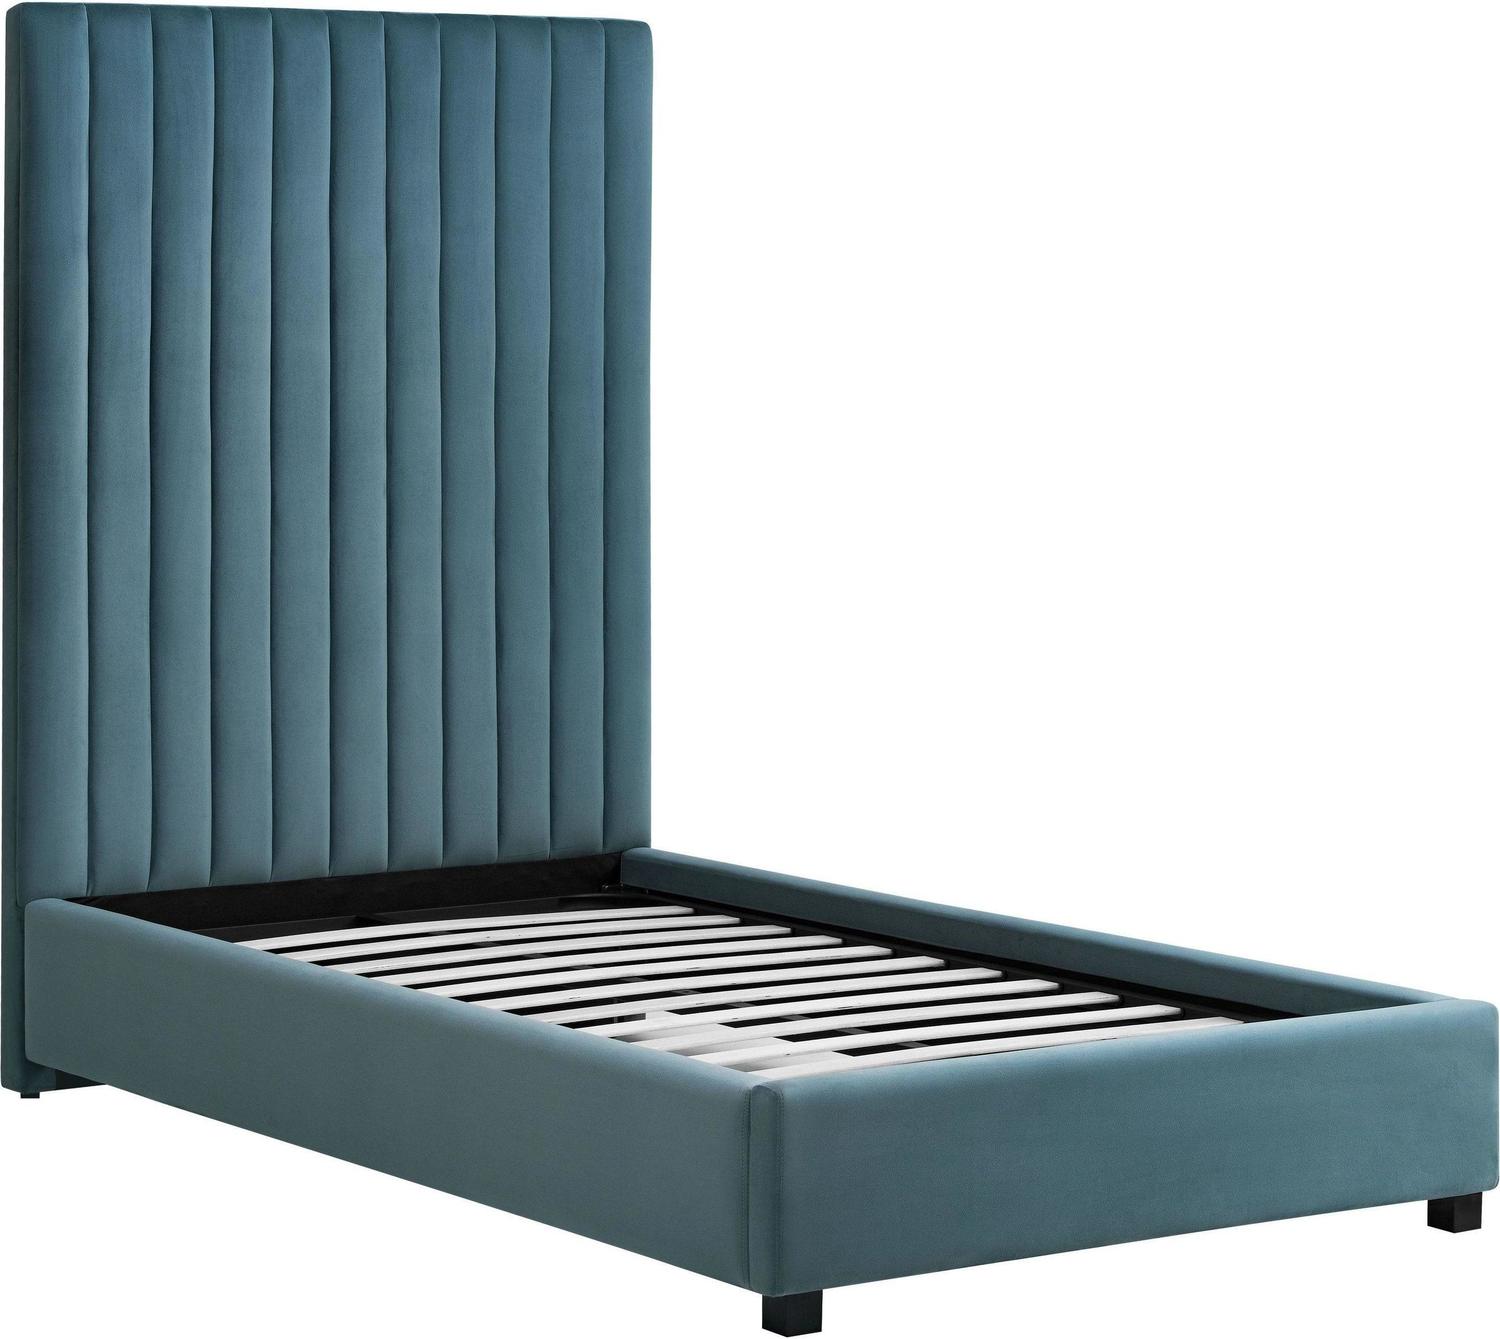 put up beds double Contemporary Design Furniture Beds Beds Sea Blue